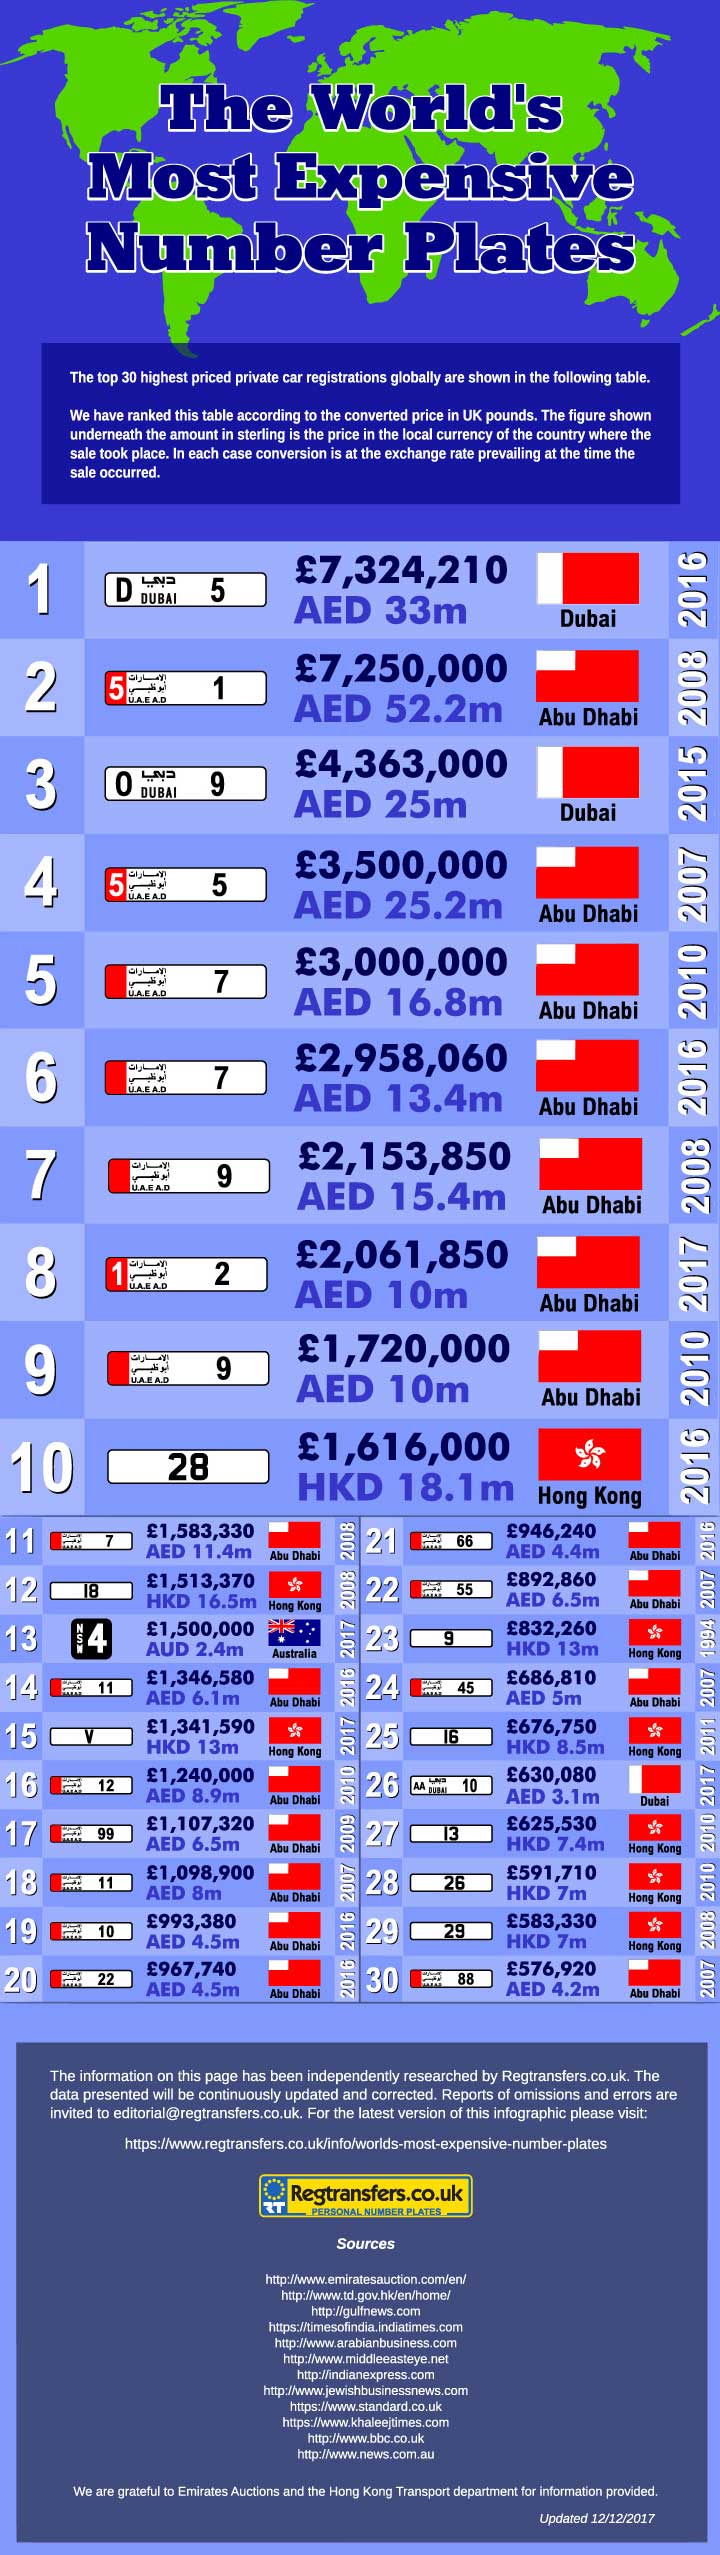 The World's Most Expensive Number Plates - from around the world infographic.